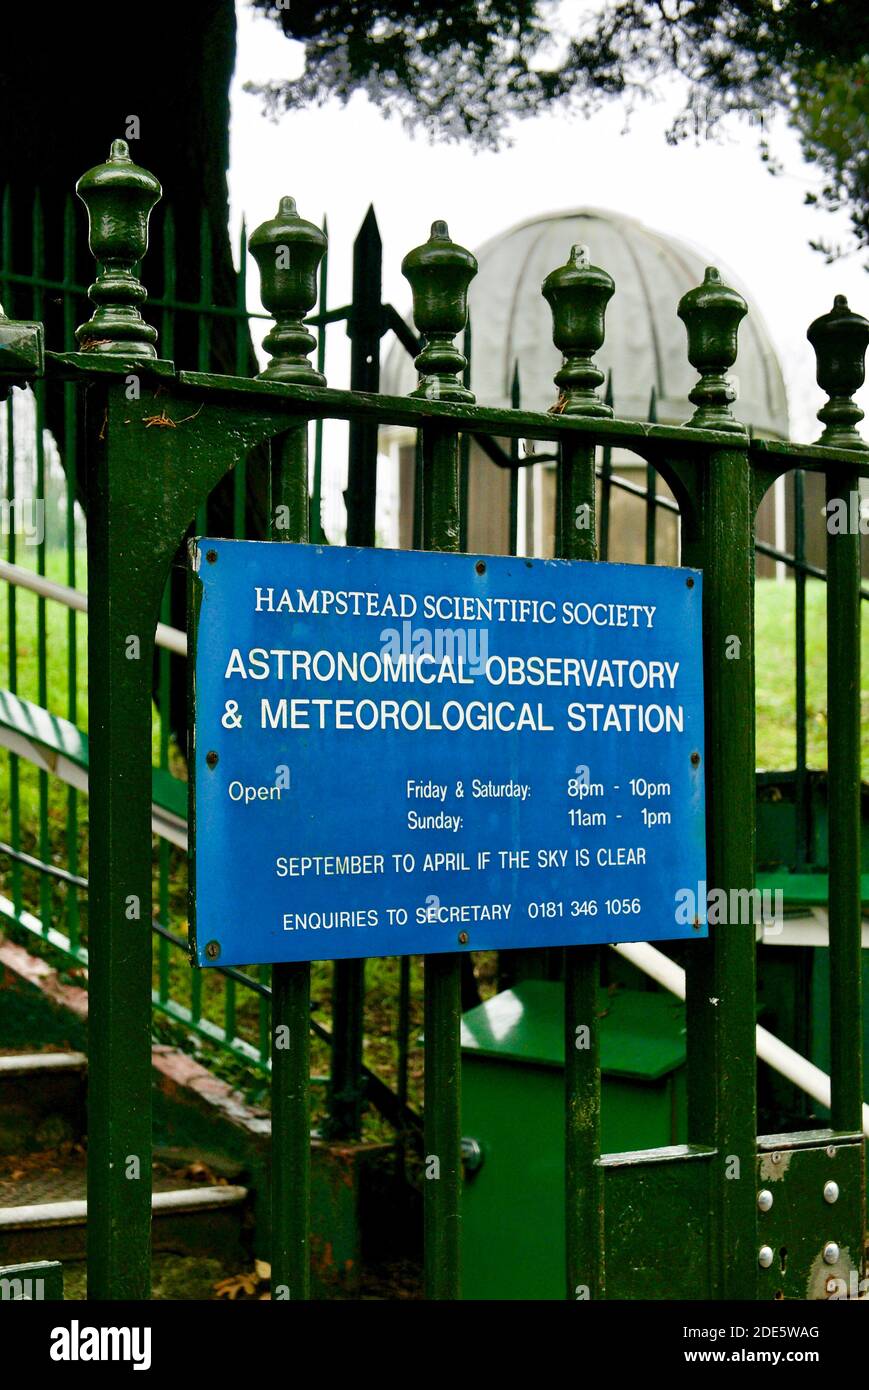 Hampstead Scientific Society Astronomical Observatory and Meteorological Station in Hampstead Village, London. Stockfoto